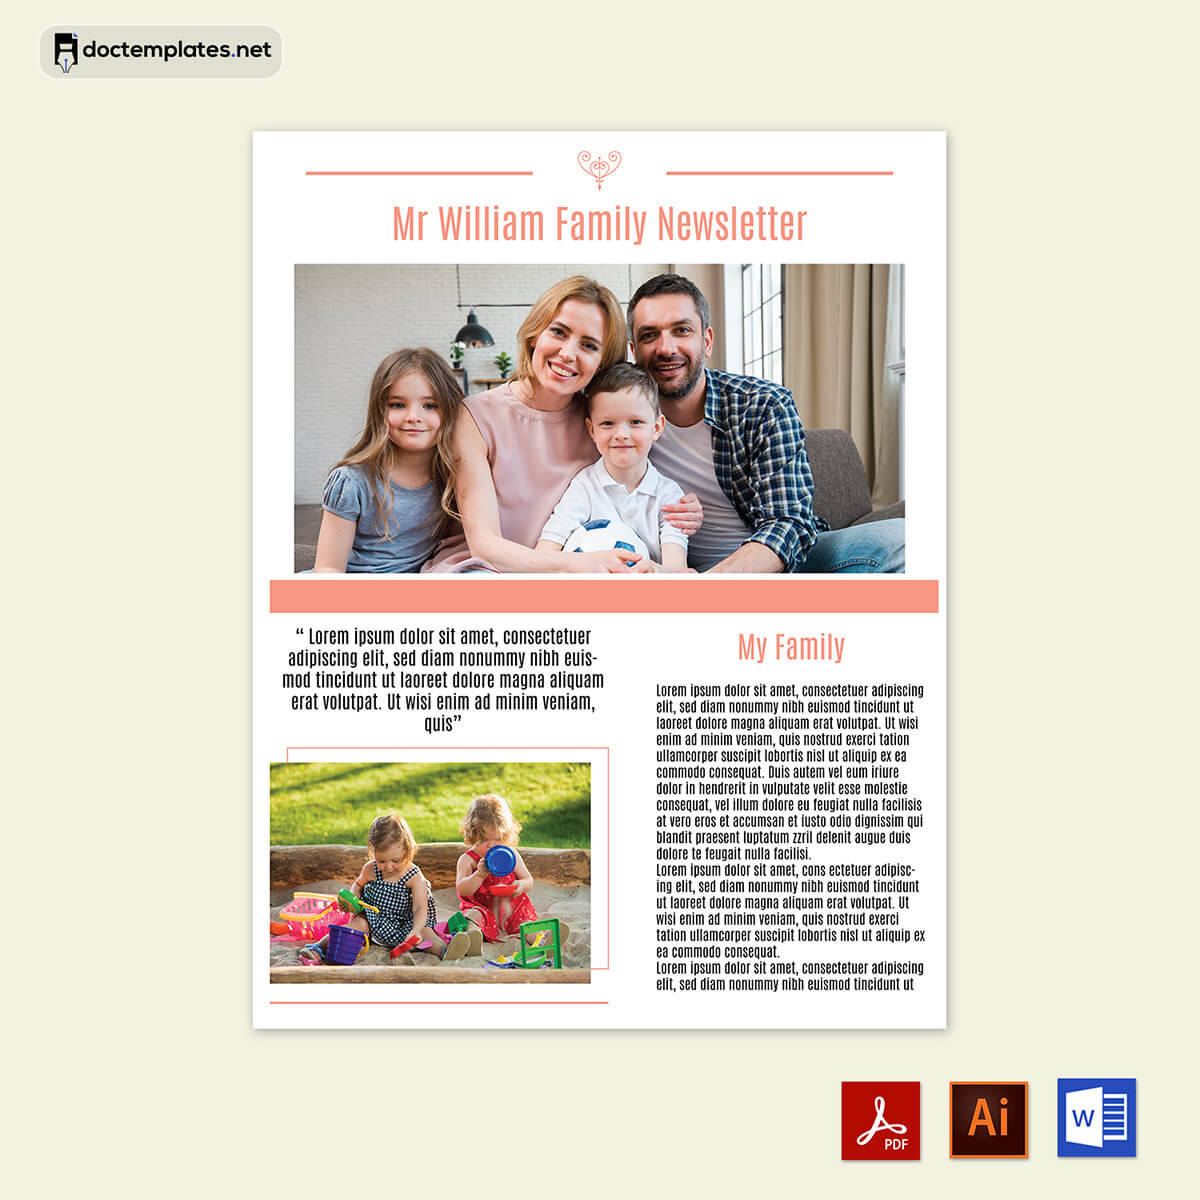 how to write a family newsletter
01